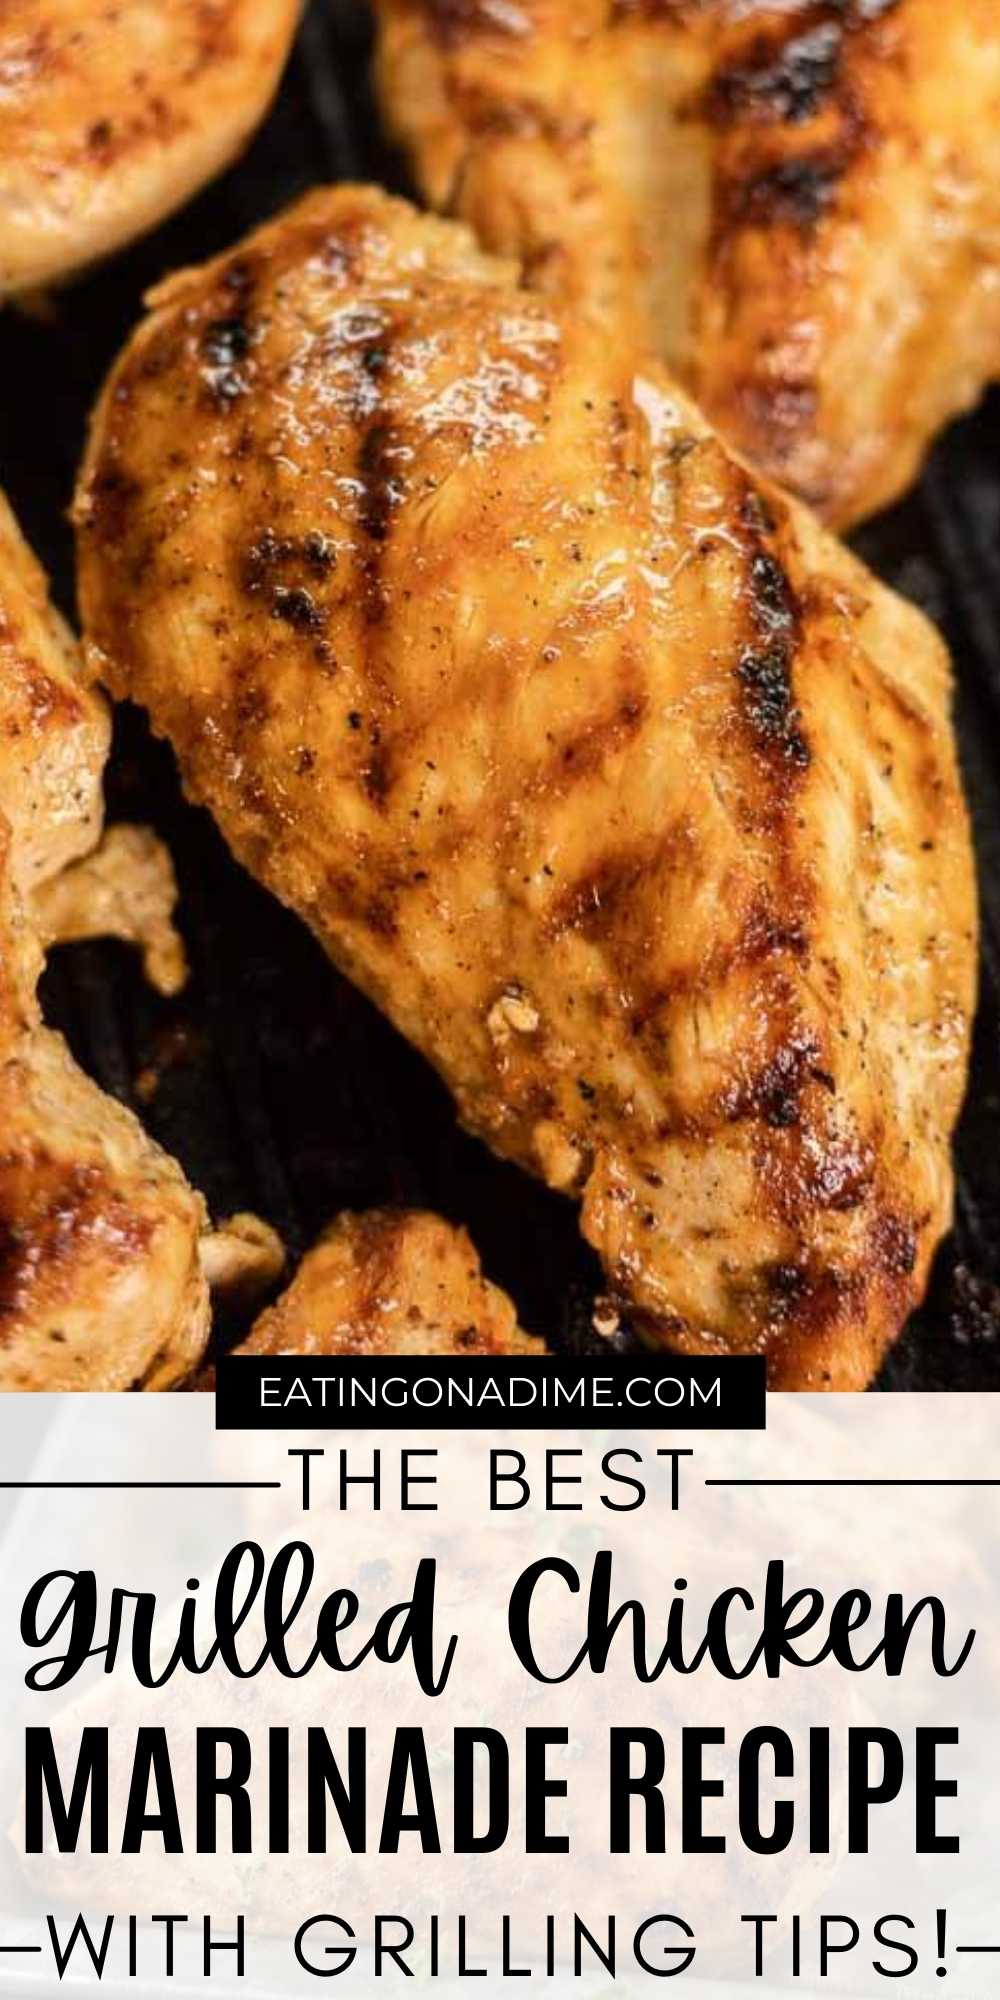 Check out the best grilled chicken marinade recipe with just a few ingredients that makes the best moist chicken breasts! Plus all the best grilling tips for the best grilled chicken breasts every time. #eatingonadime #chickenrecipes #grillingrecipes 
